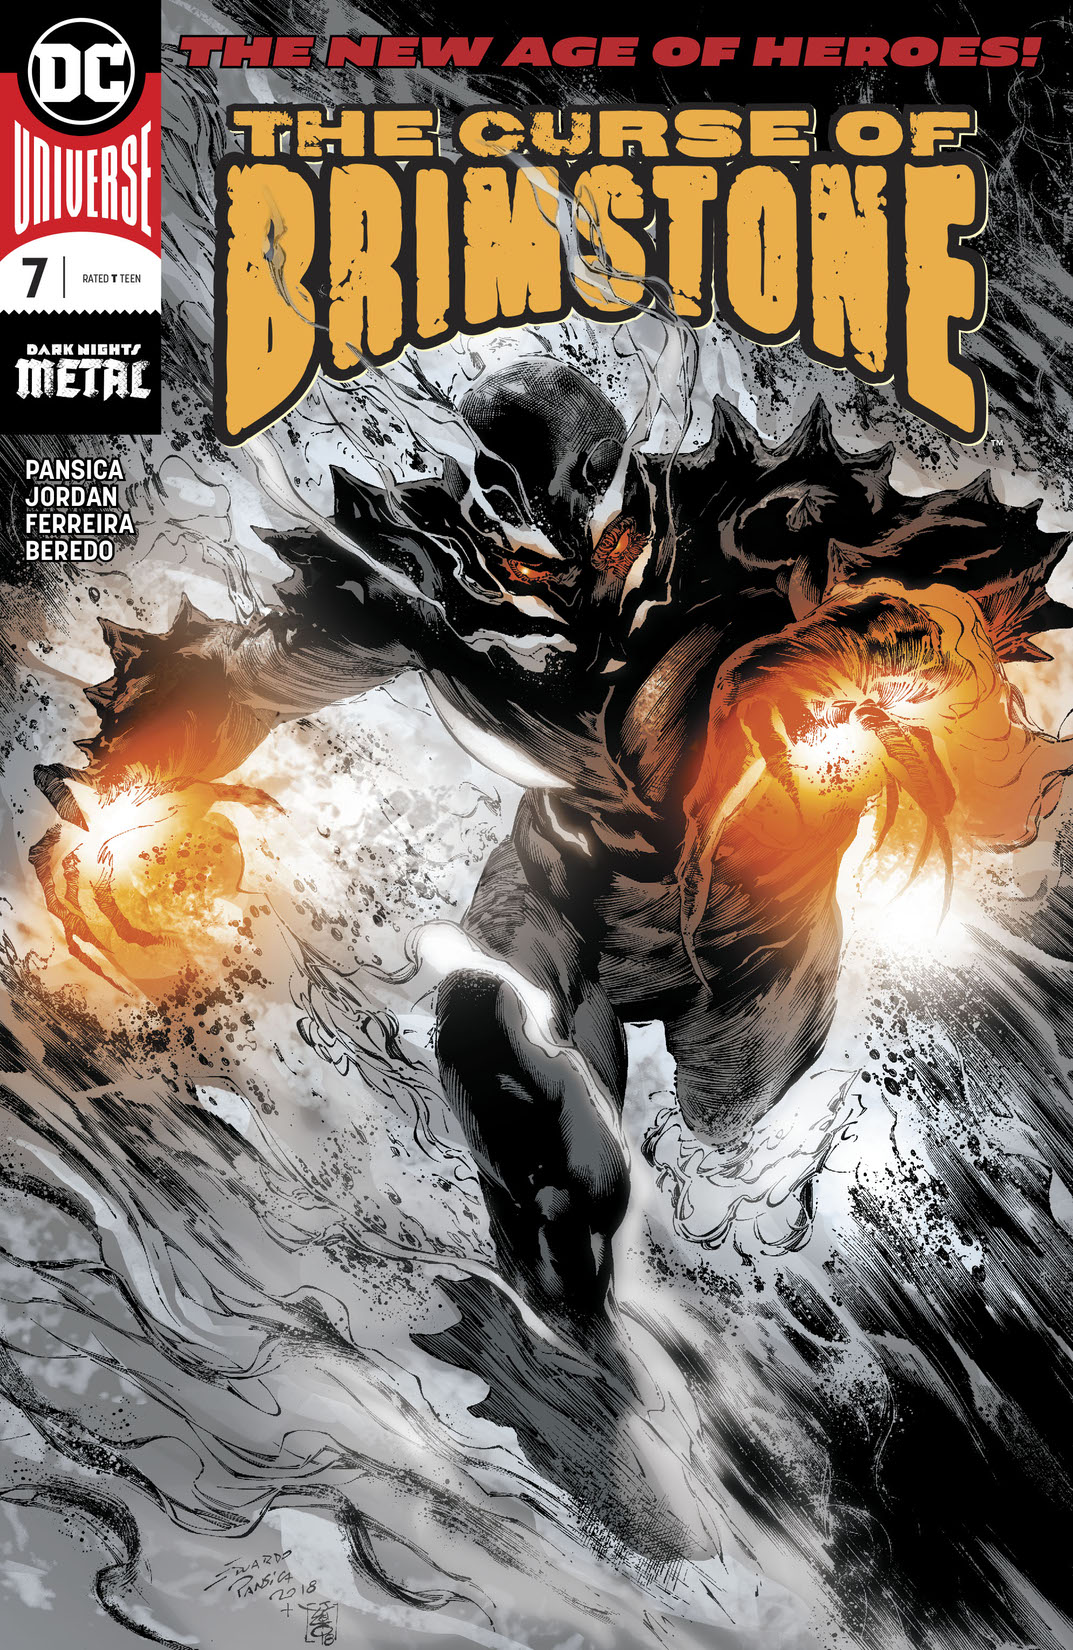 The Curse of Brimstone #7 preview images